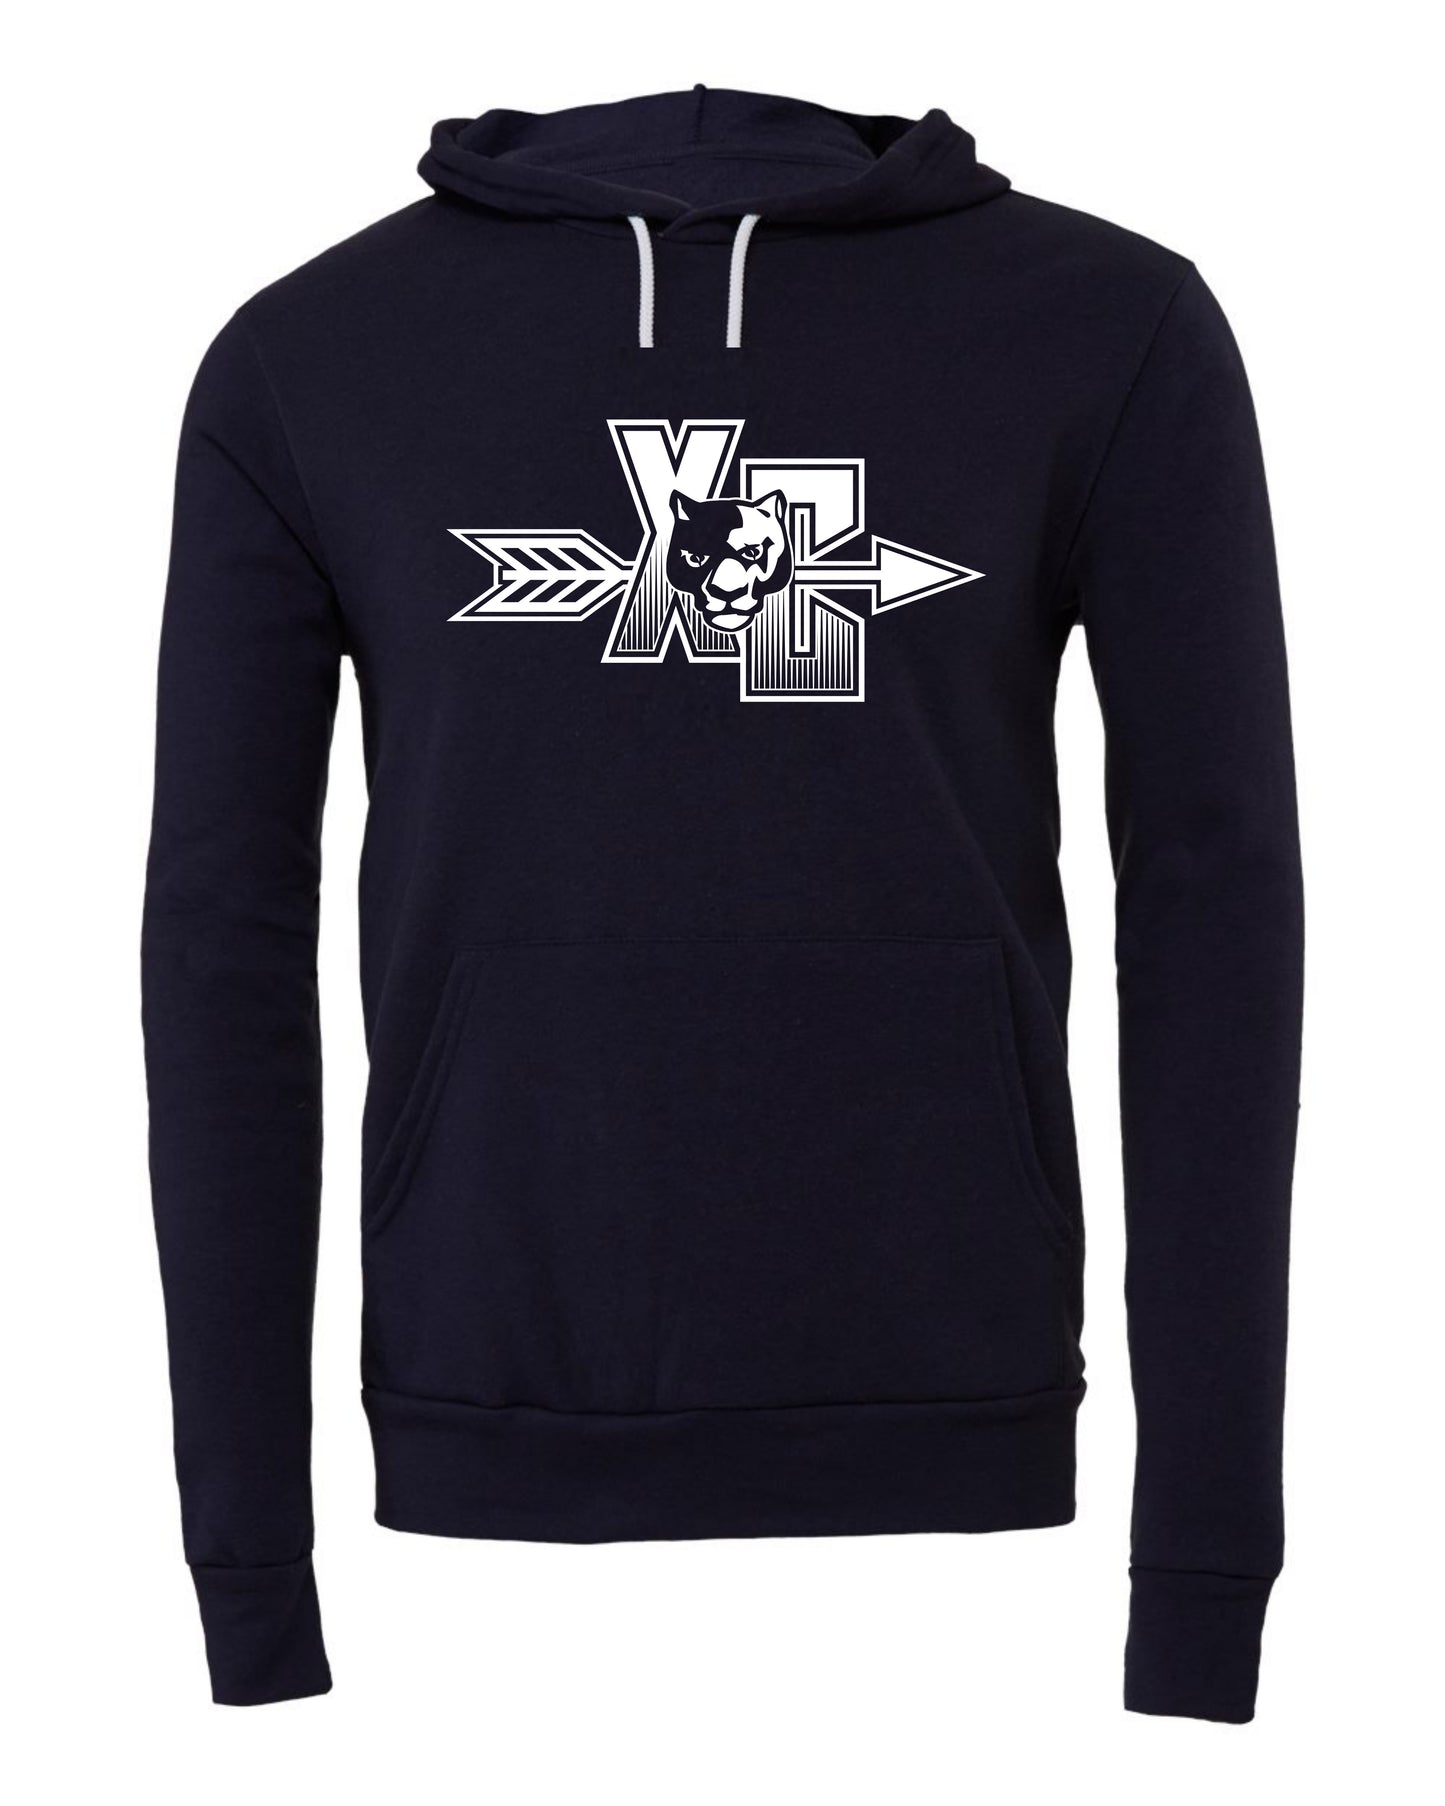 XC Panther Head - Youth Hoodie